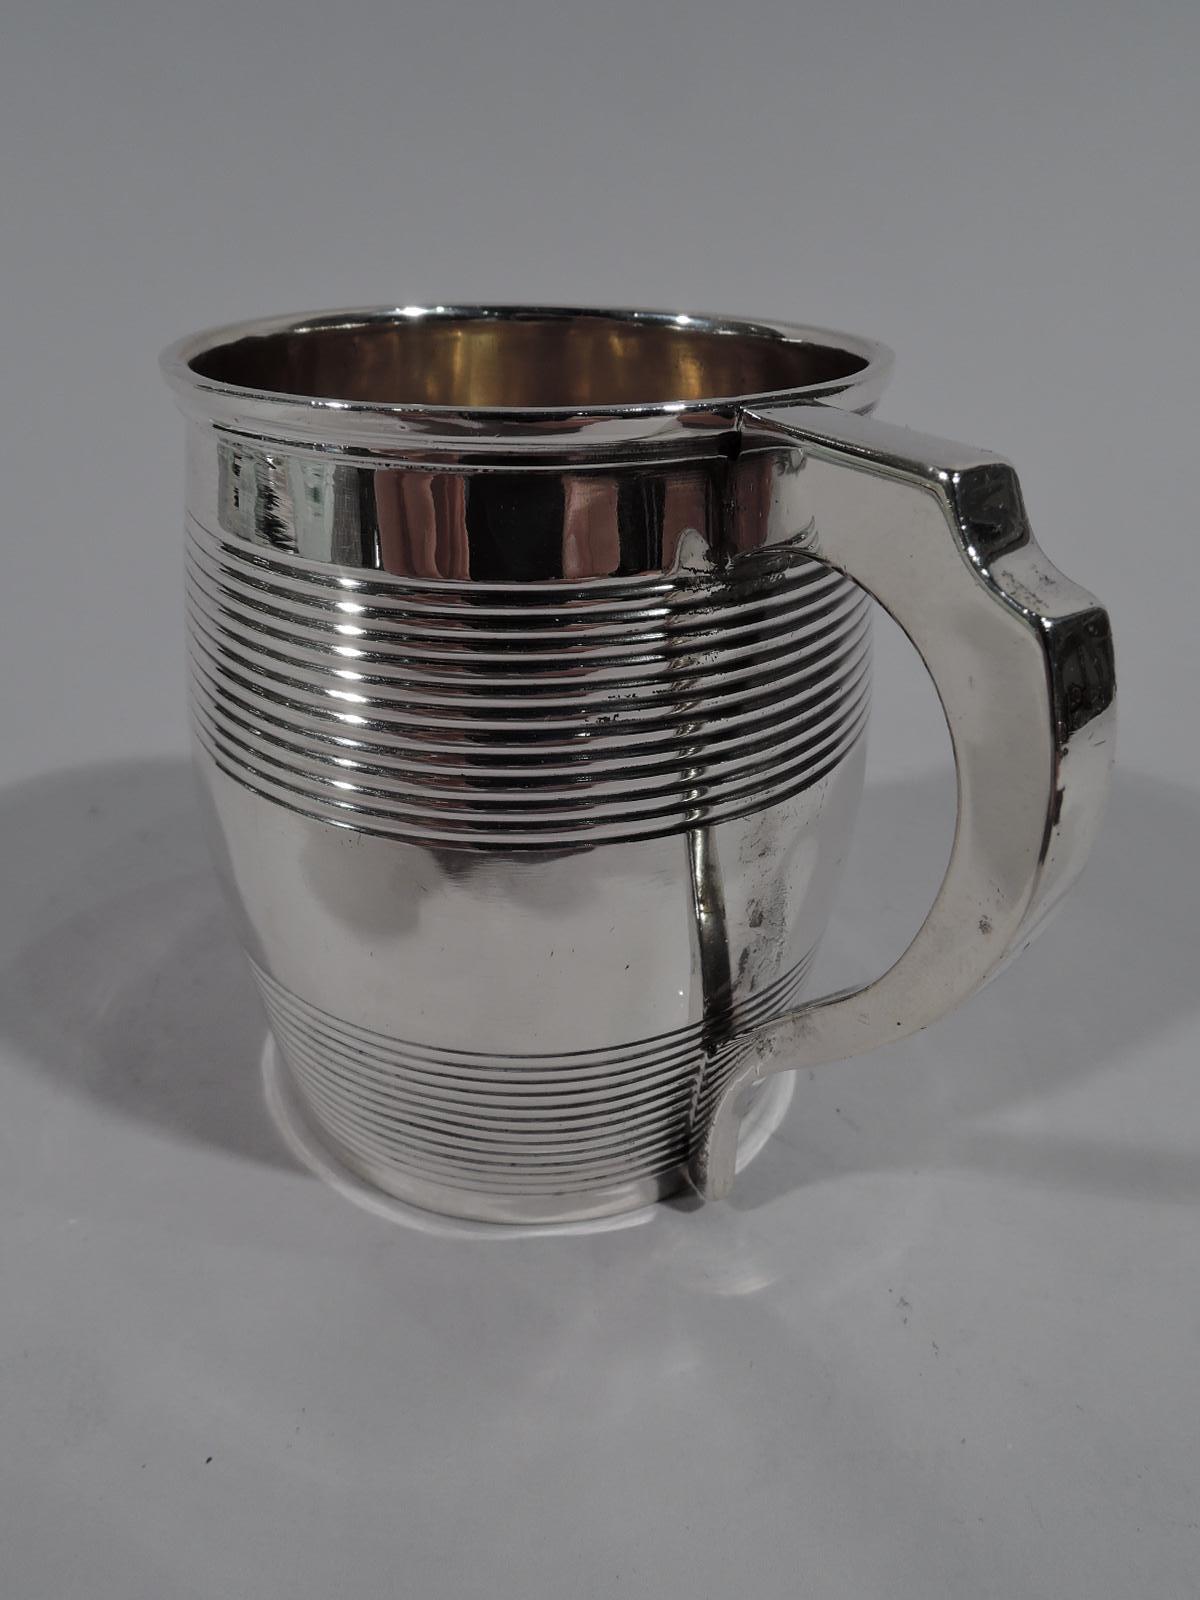 George III sterling silver christening mug. Made by Elizabeth Morley in London in 1809. Barrel form with scroll bracket handle. Reeded “hoops” at top and bottom. Middle vacant. Fully marked. Weight: 2.5 troy ounces.